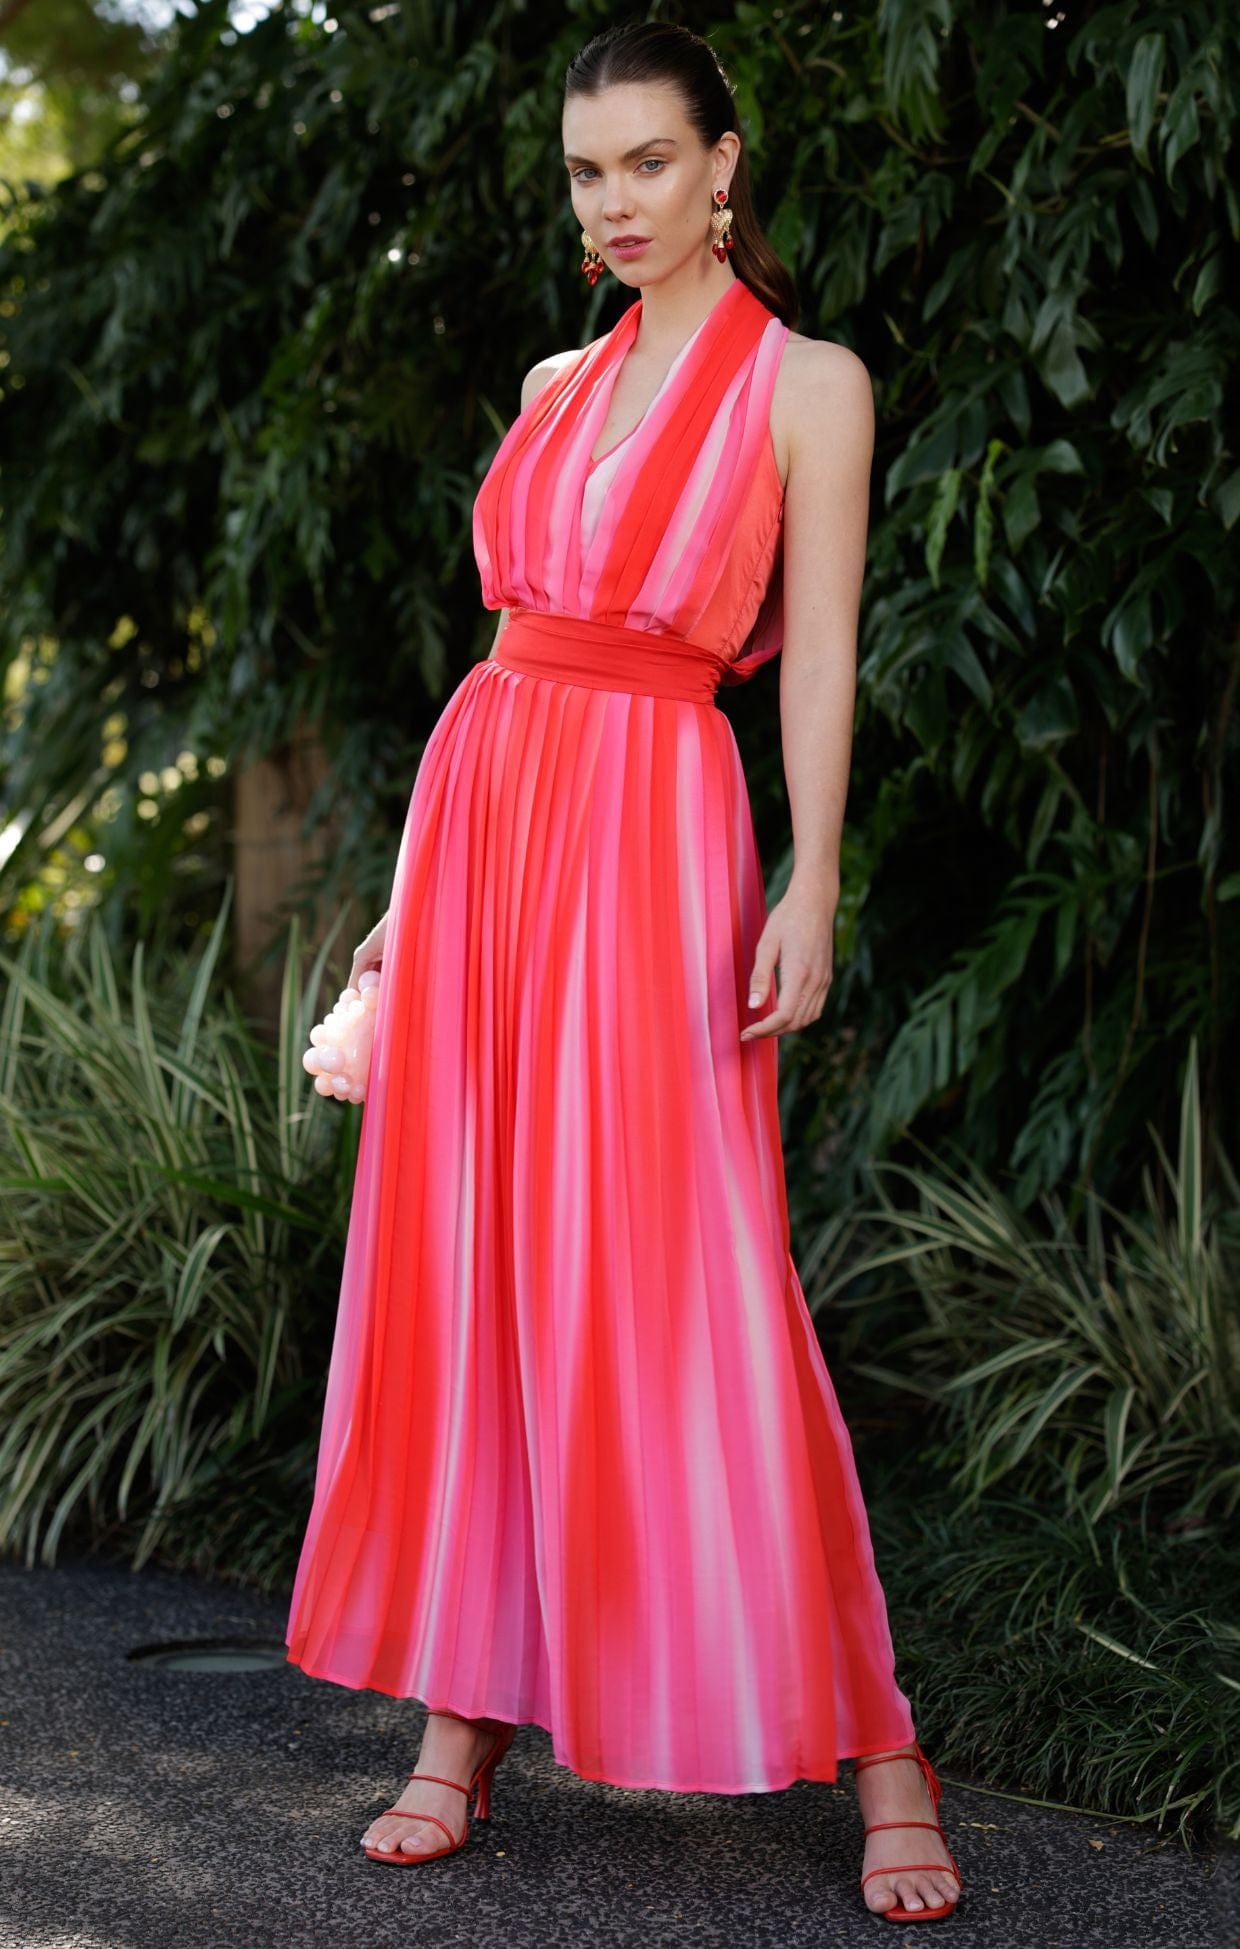 Dresses Events THRILLER PLOT PLEATED DRESS IN RED PINK OMBRE